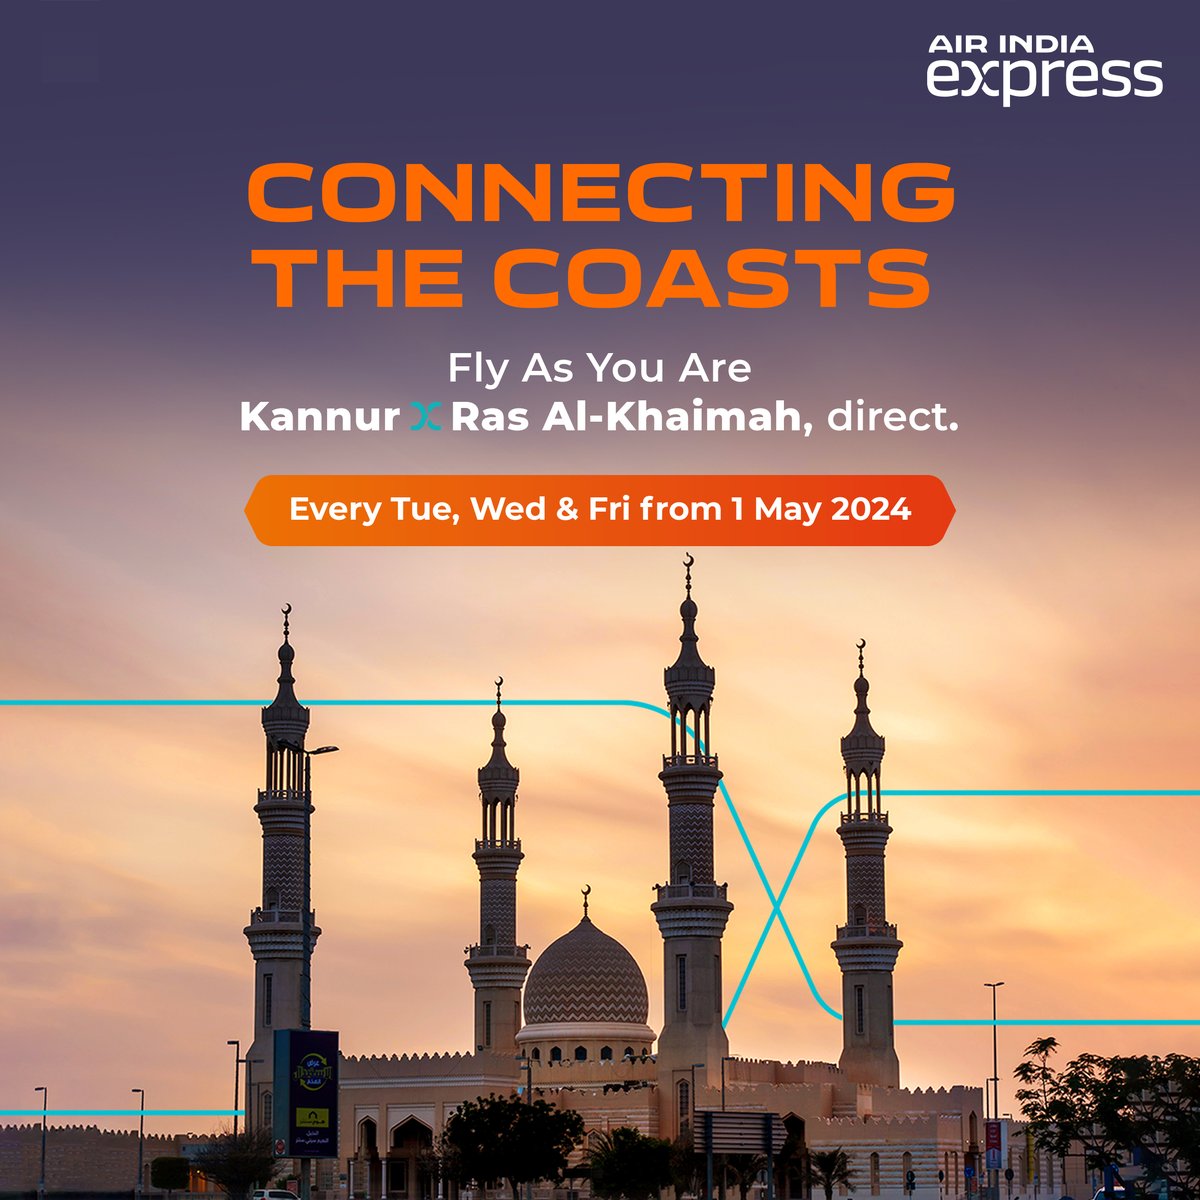 Escape to the serene shores of Ras Al-Khaimah or explore the vibrant coastal life of Kannur. Introducing direct flights thrice a week between Kannur and Ras Al-Khaimah from 1 May 2024. #FlyAsYouAre with Gourmair hot meals, plush comfy seats and exclusive loyalty benefits. Log in